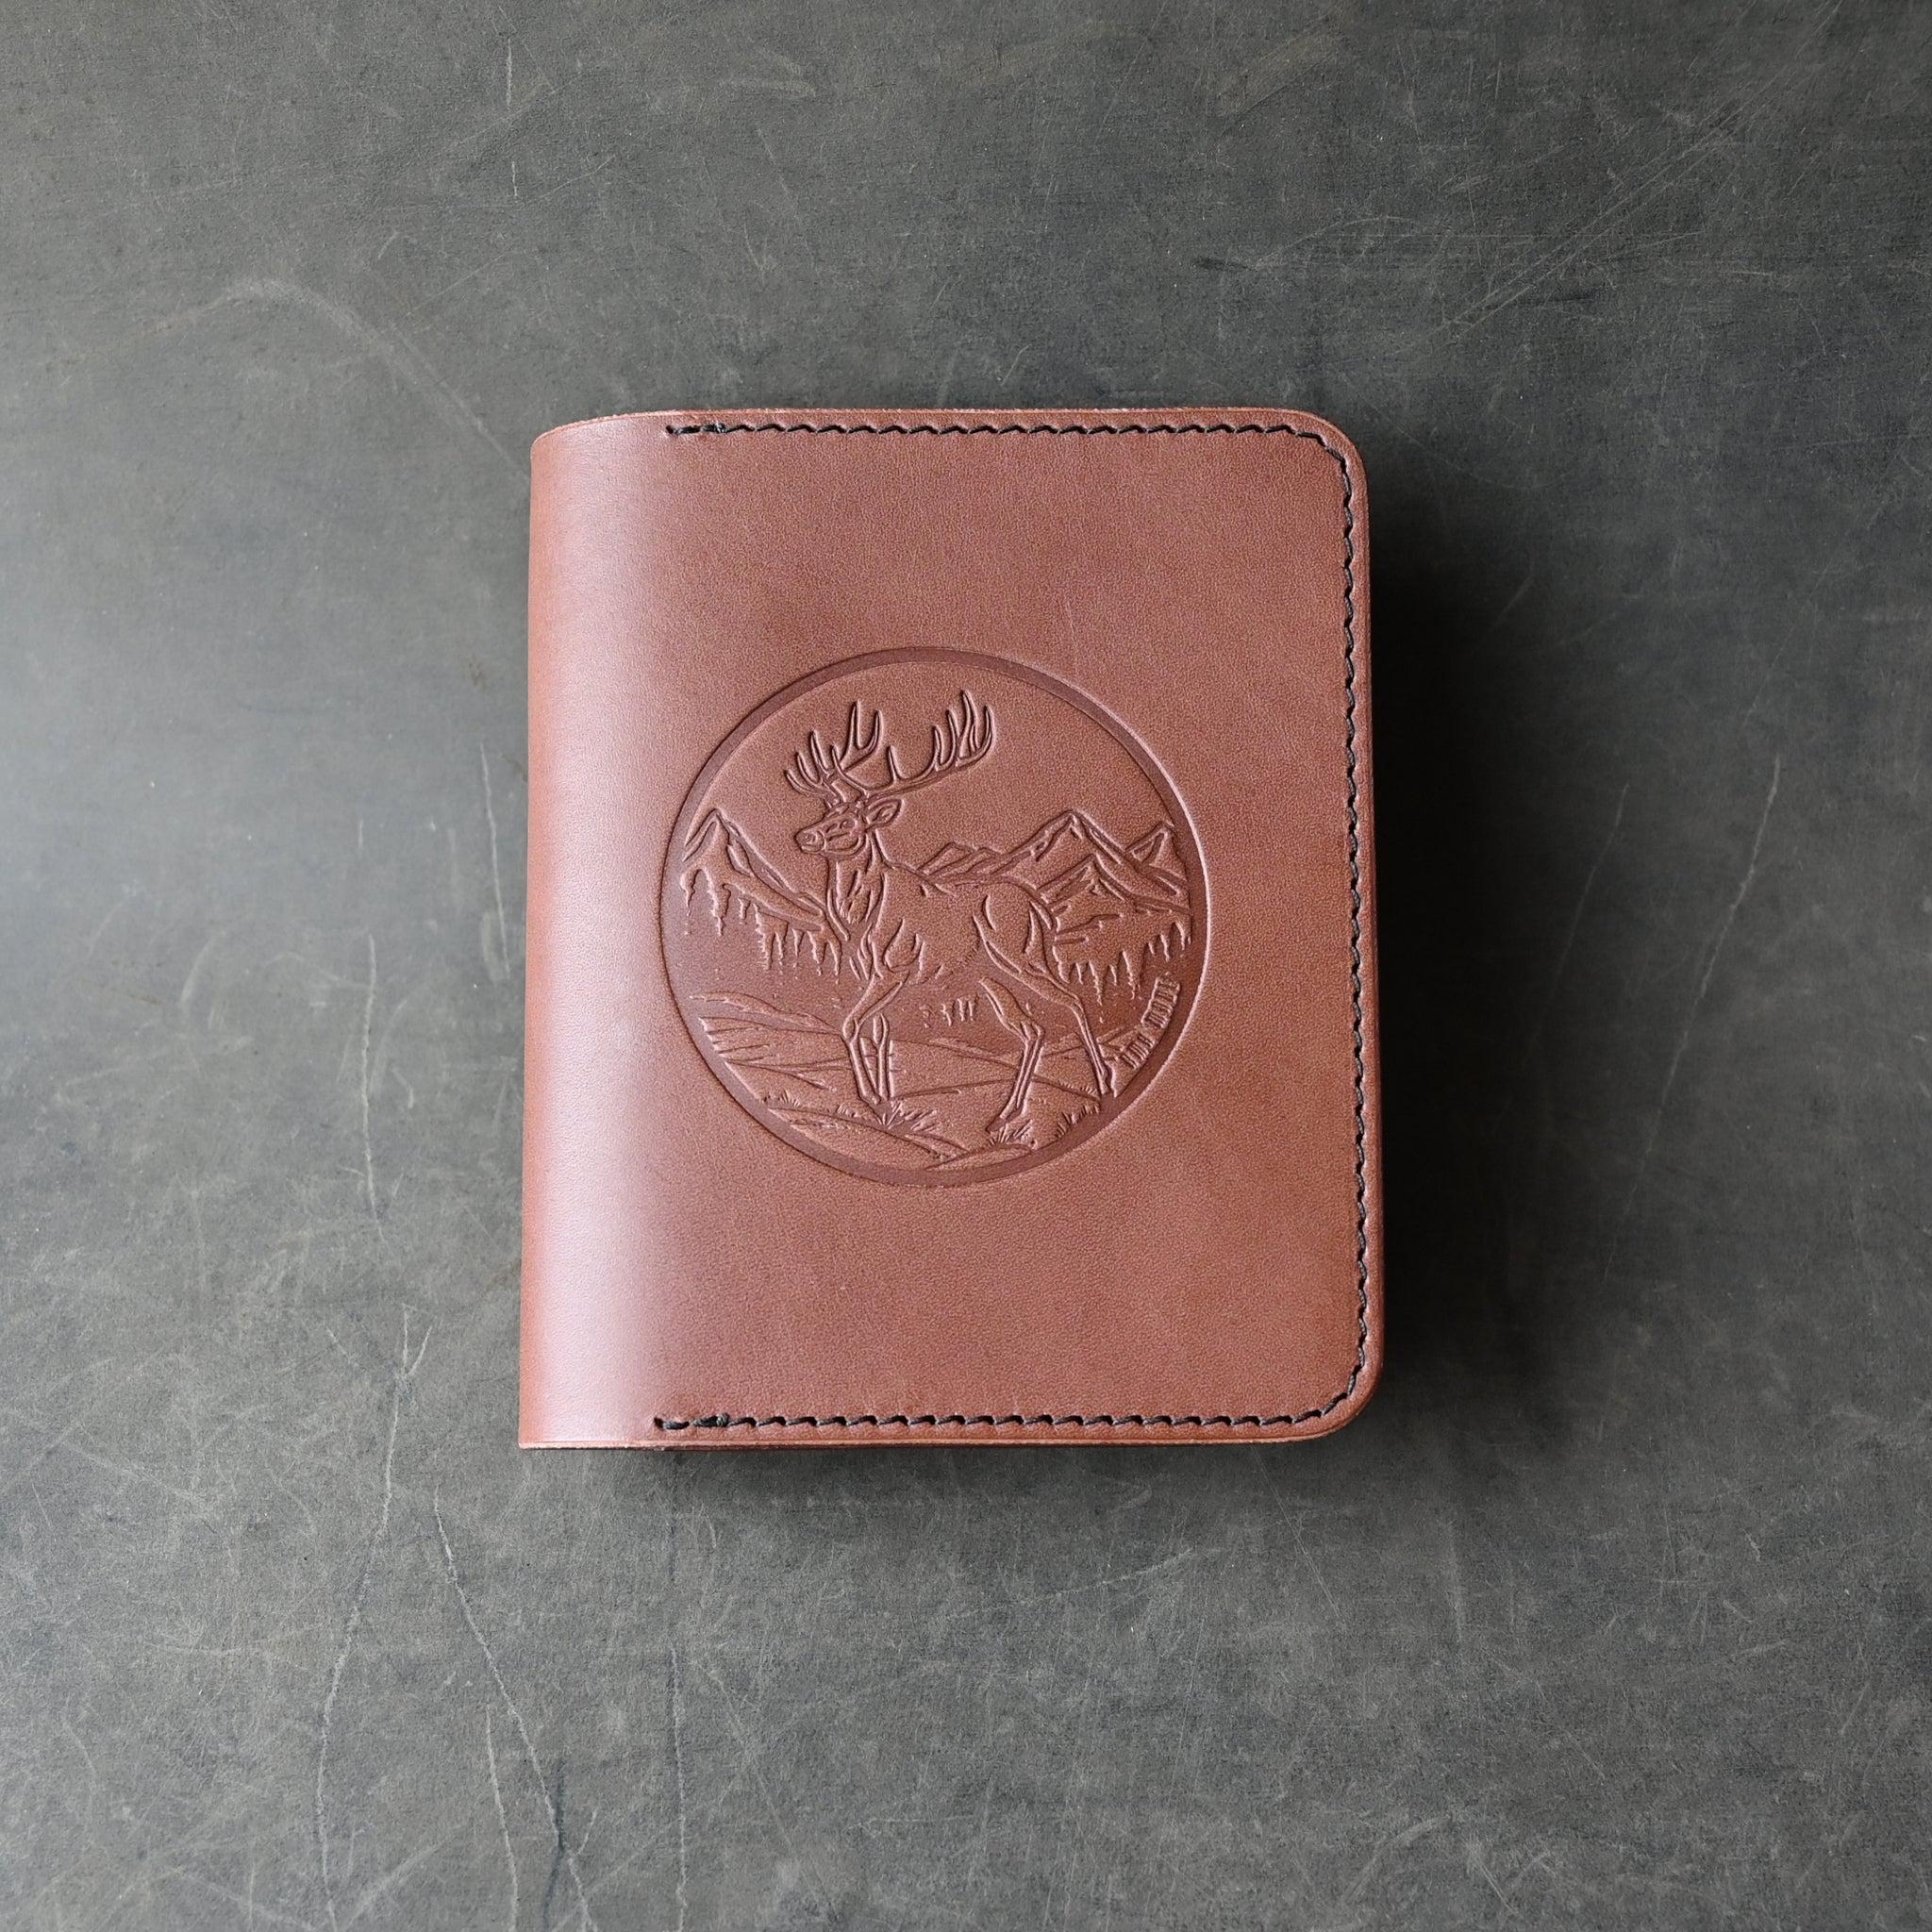 Ready To Ship A6 Leather Notebook Cover Chocolate Brown w/ Deer Stamp